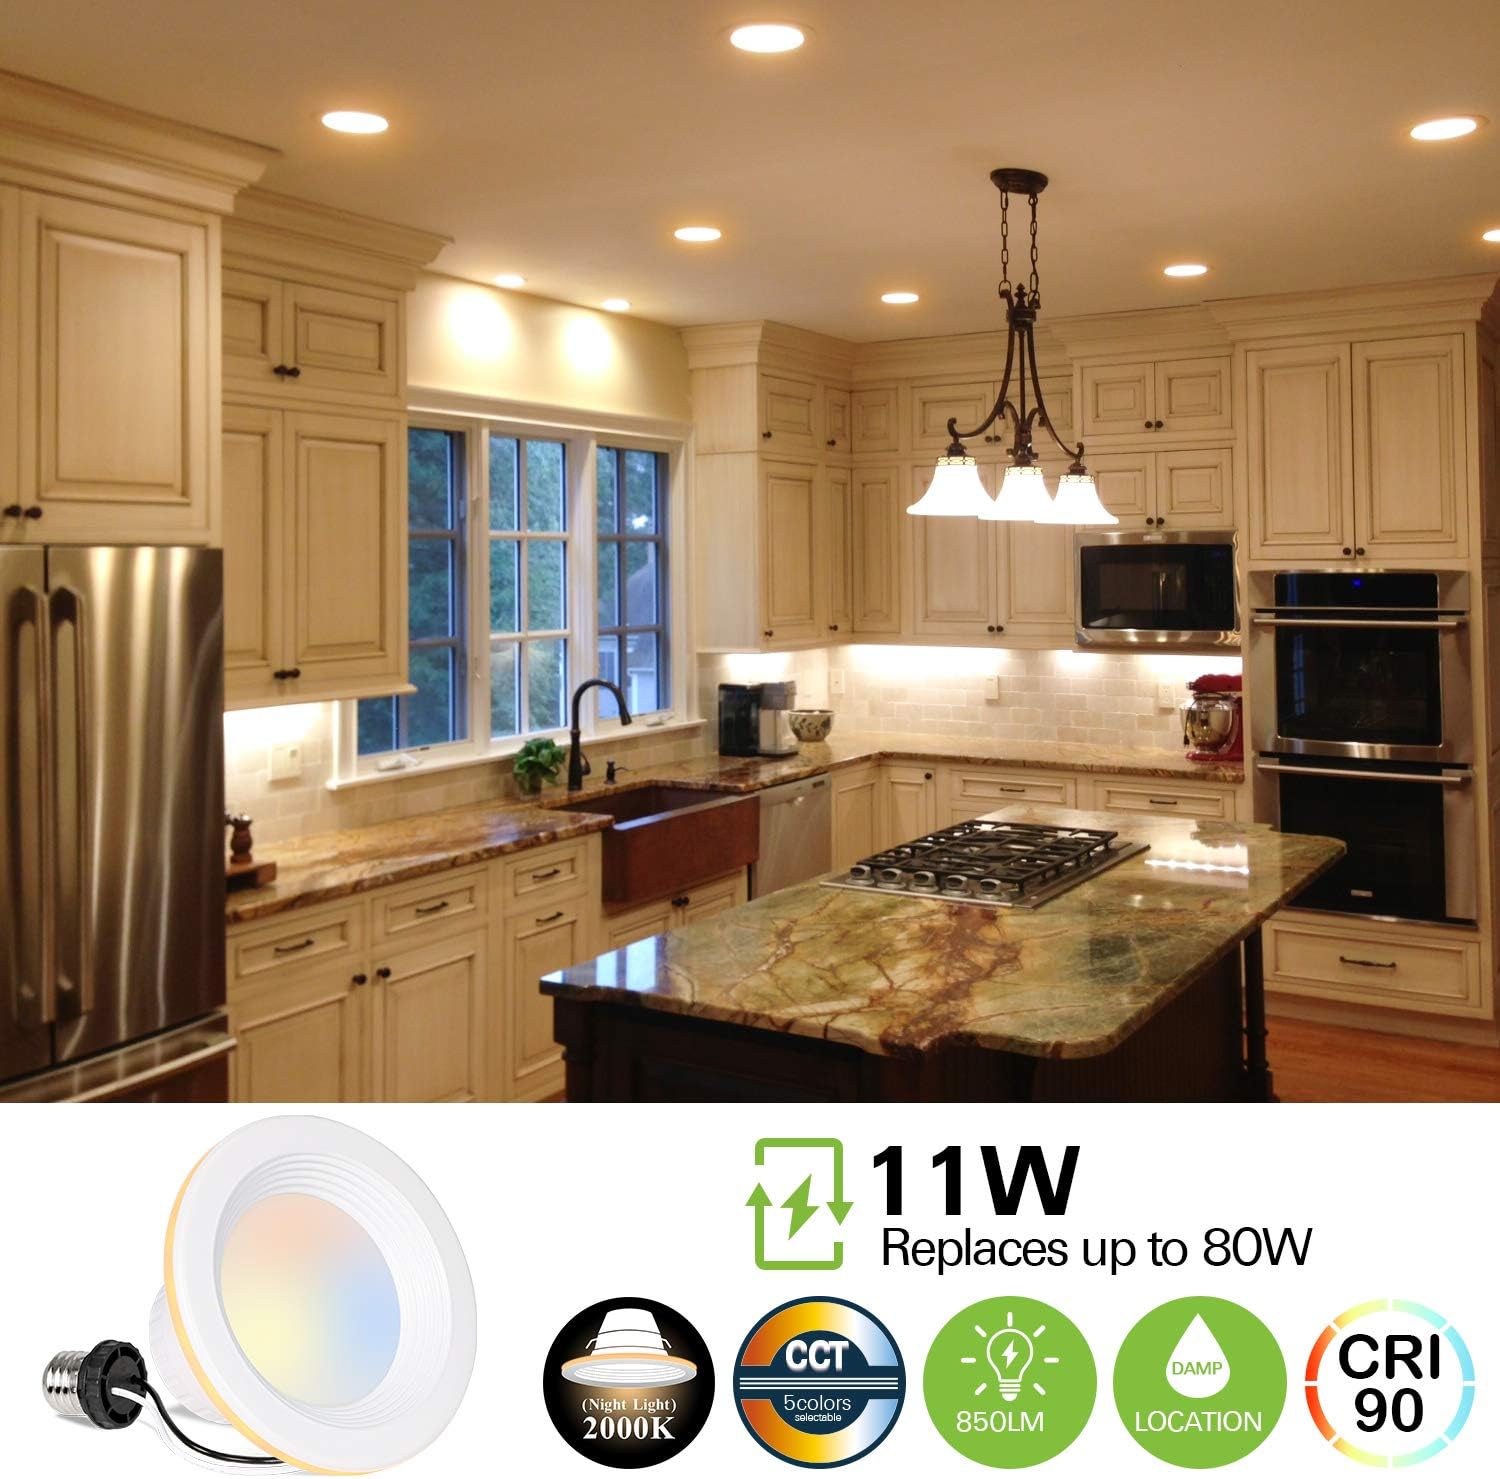 Led Recessed Lighting With Night Light, 6 Can Lights With Night Light